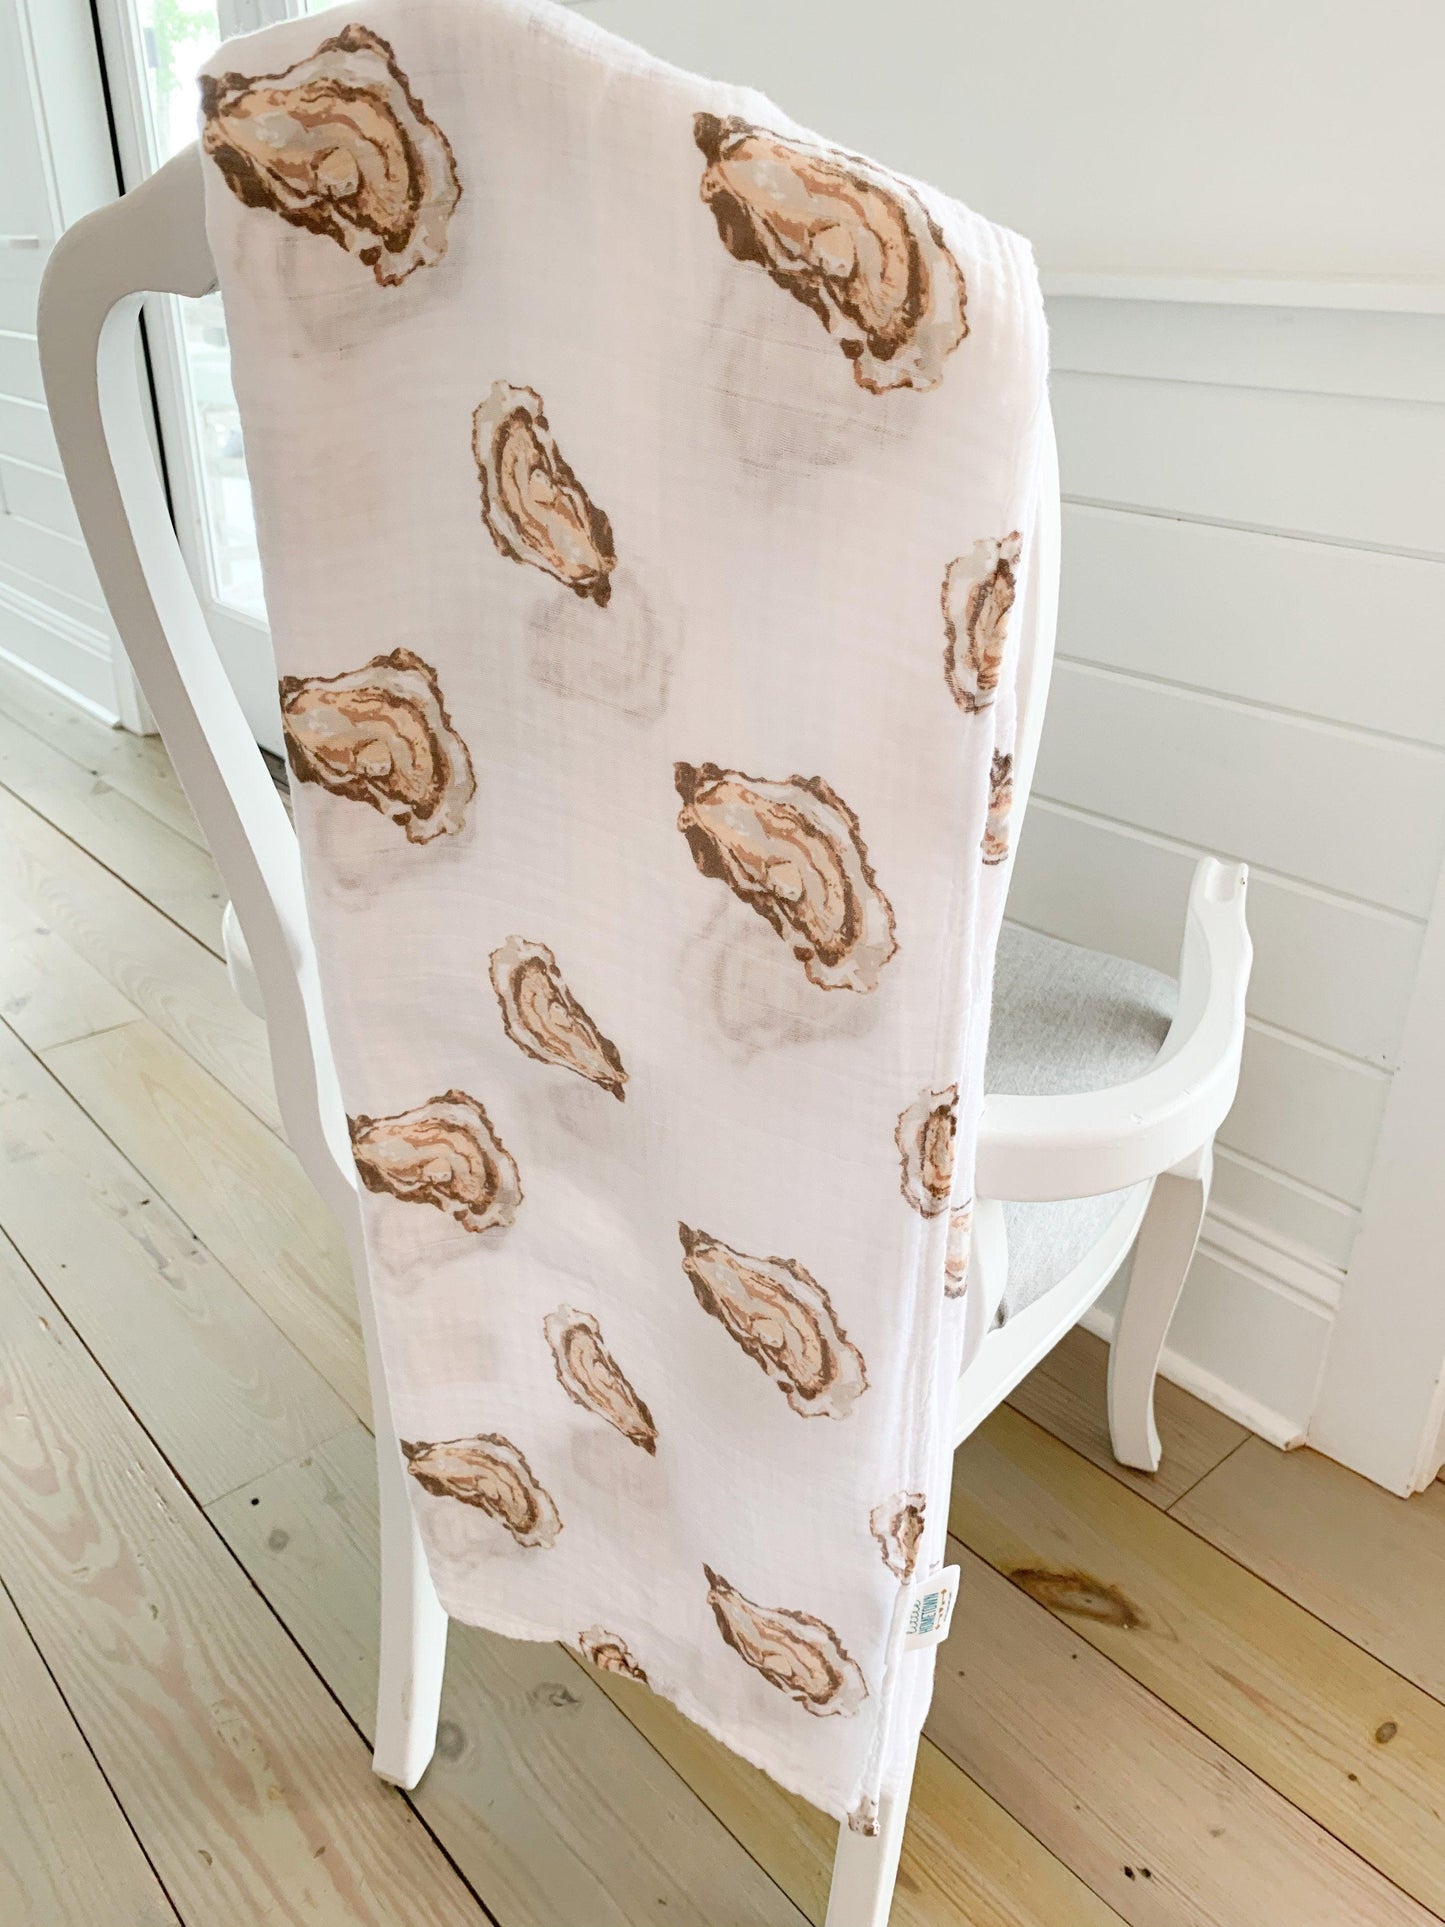 White muslin swaddle blanket with playful oyster illustrations and the text "Aw Shucks!" in blue script.